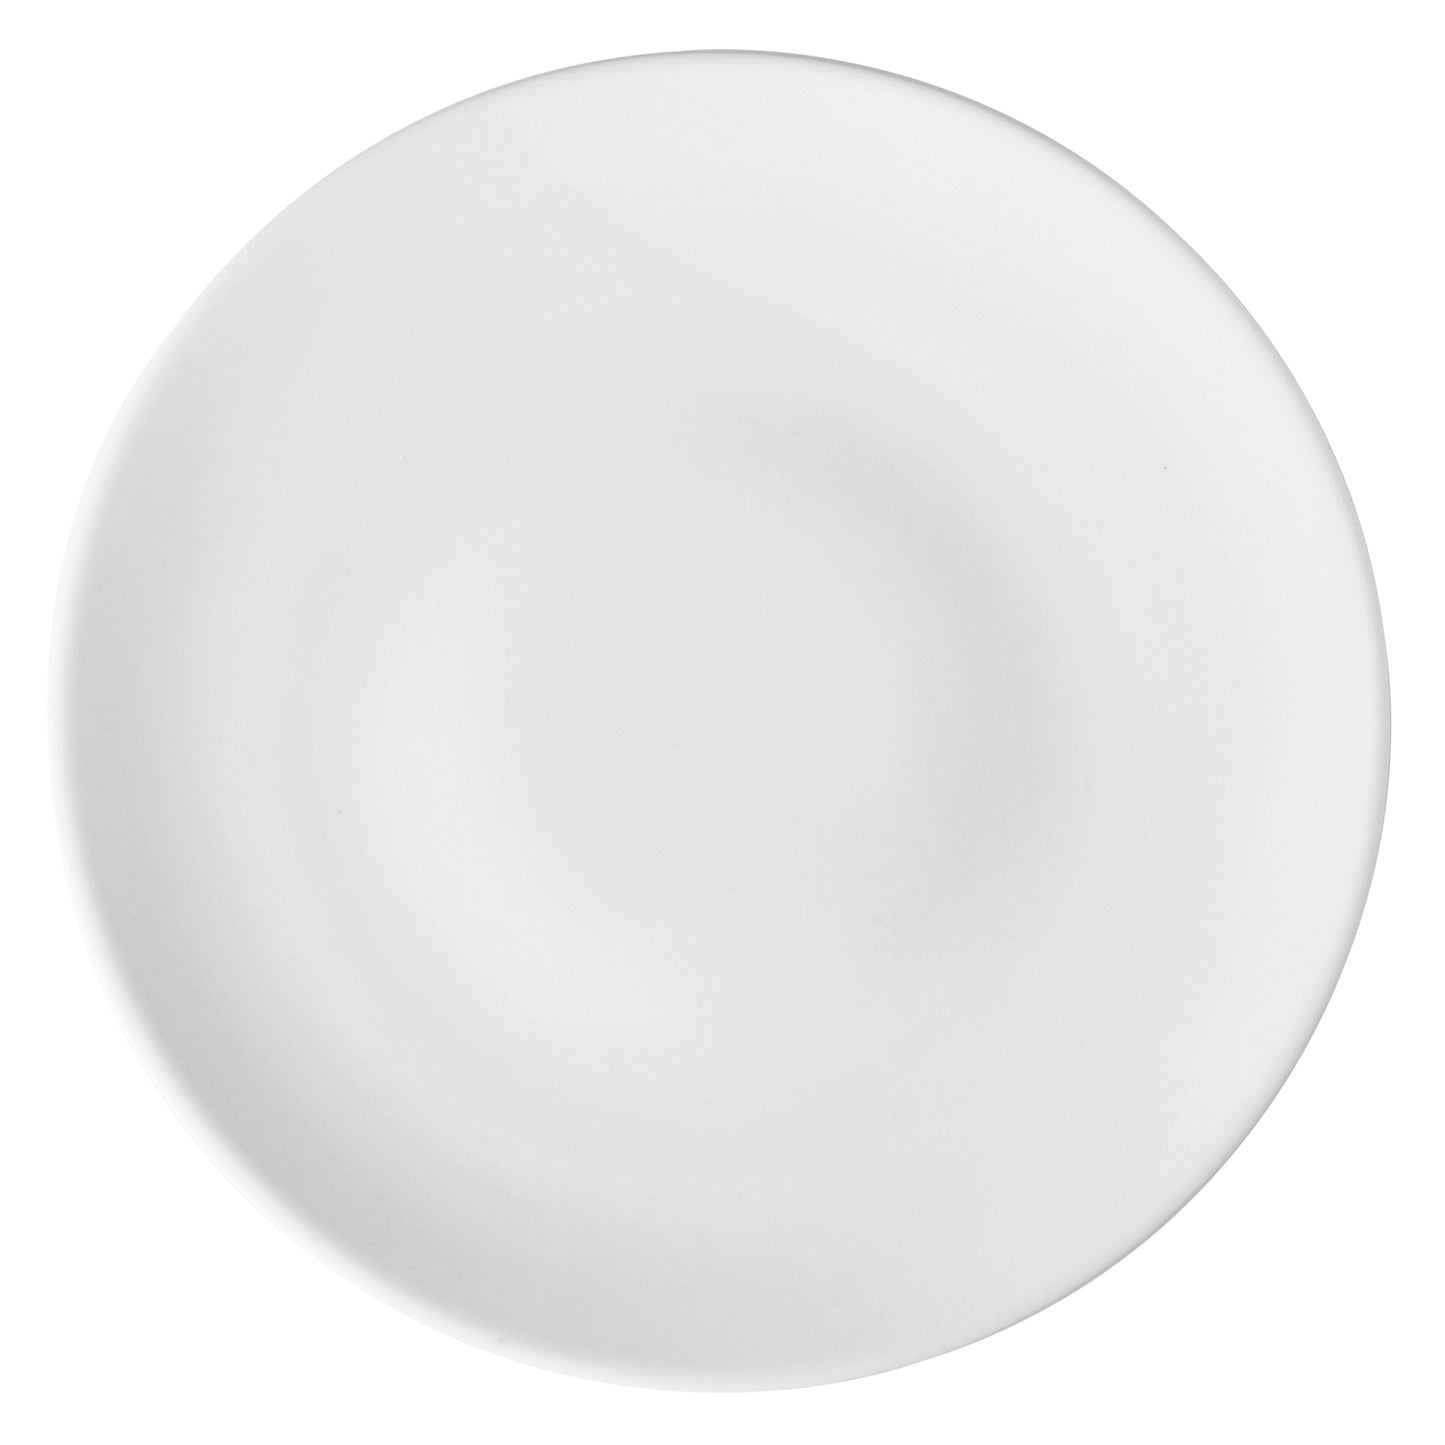 7" Bright White Porcelain Coupe Plate, Corona Actualite (Stocked) (12 Pack)